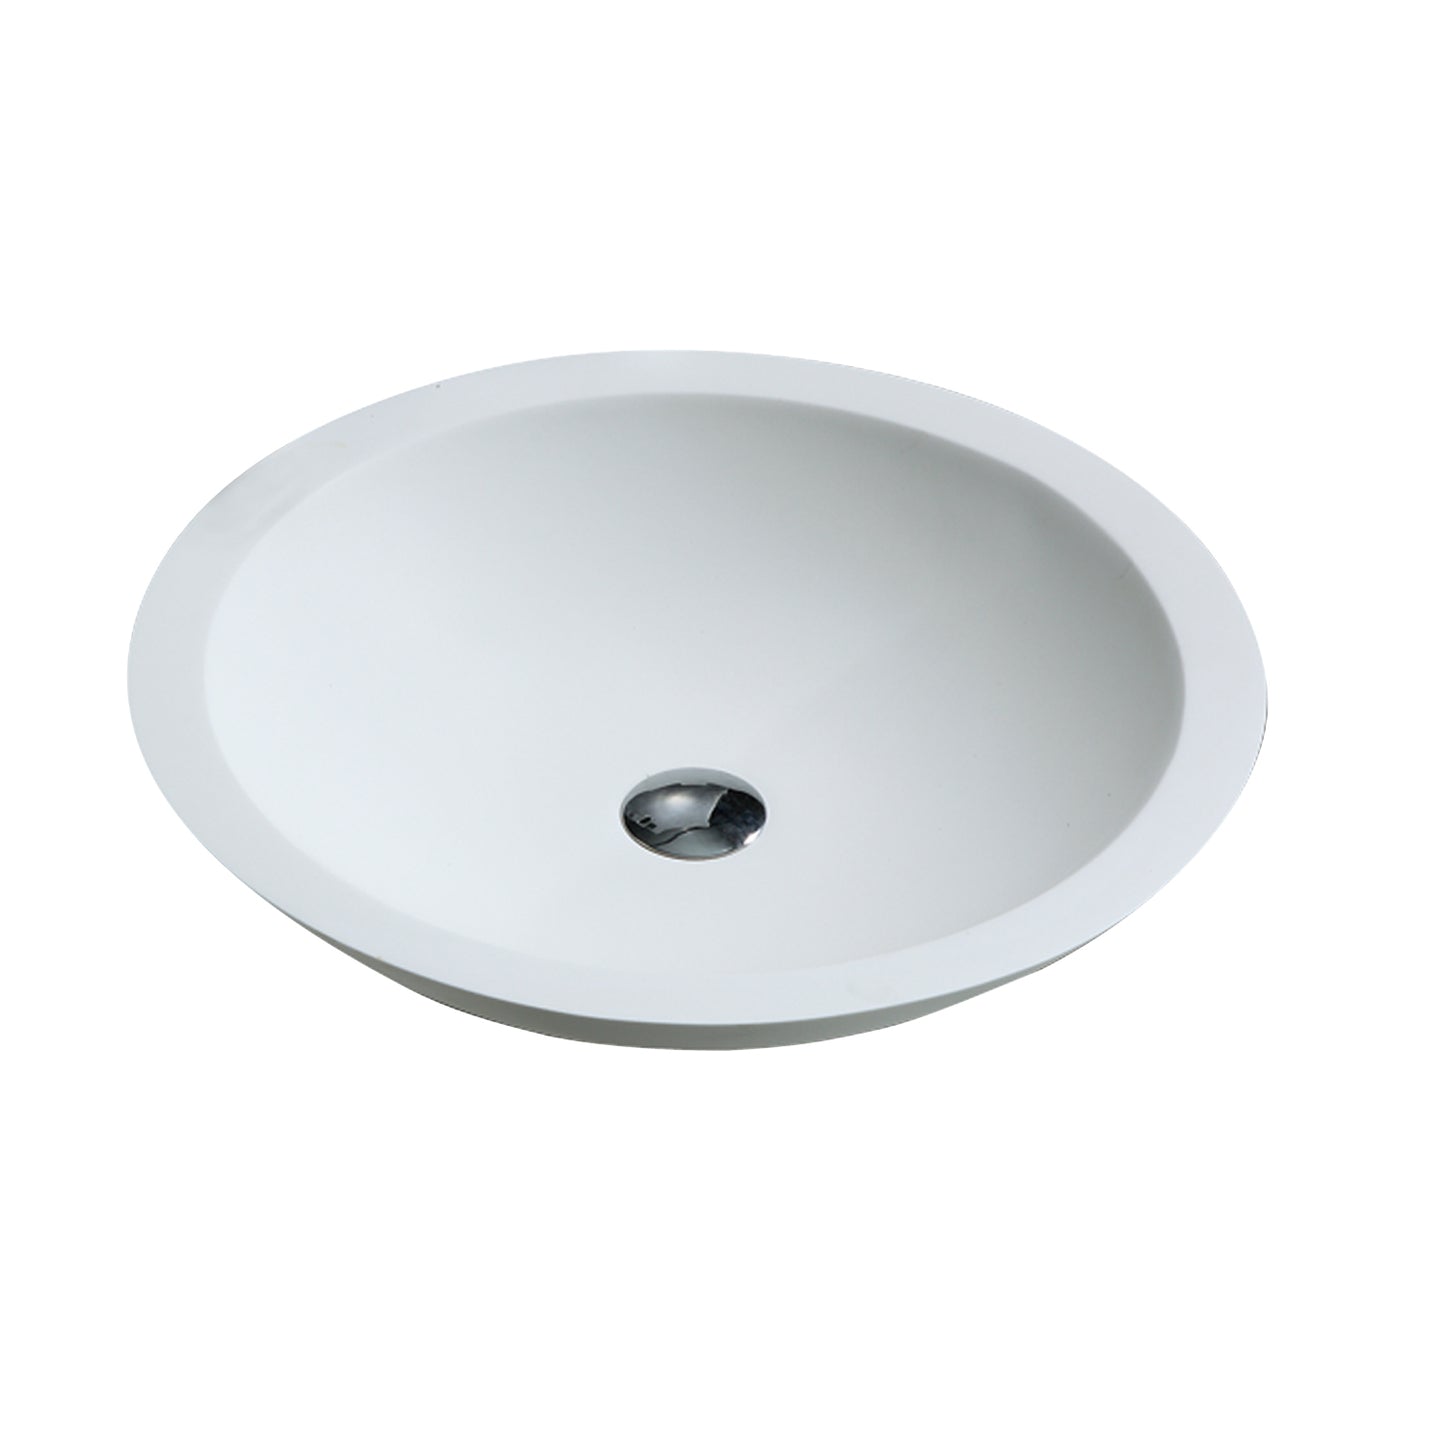 Baldwin Resin 20" Round Shallow Vessel Sink with Gloss White Finish